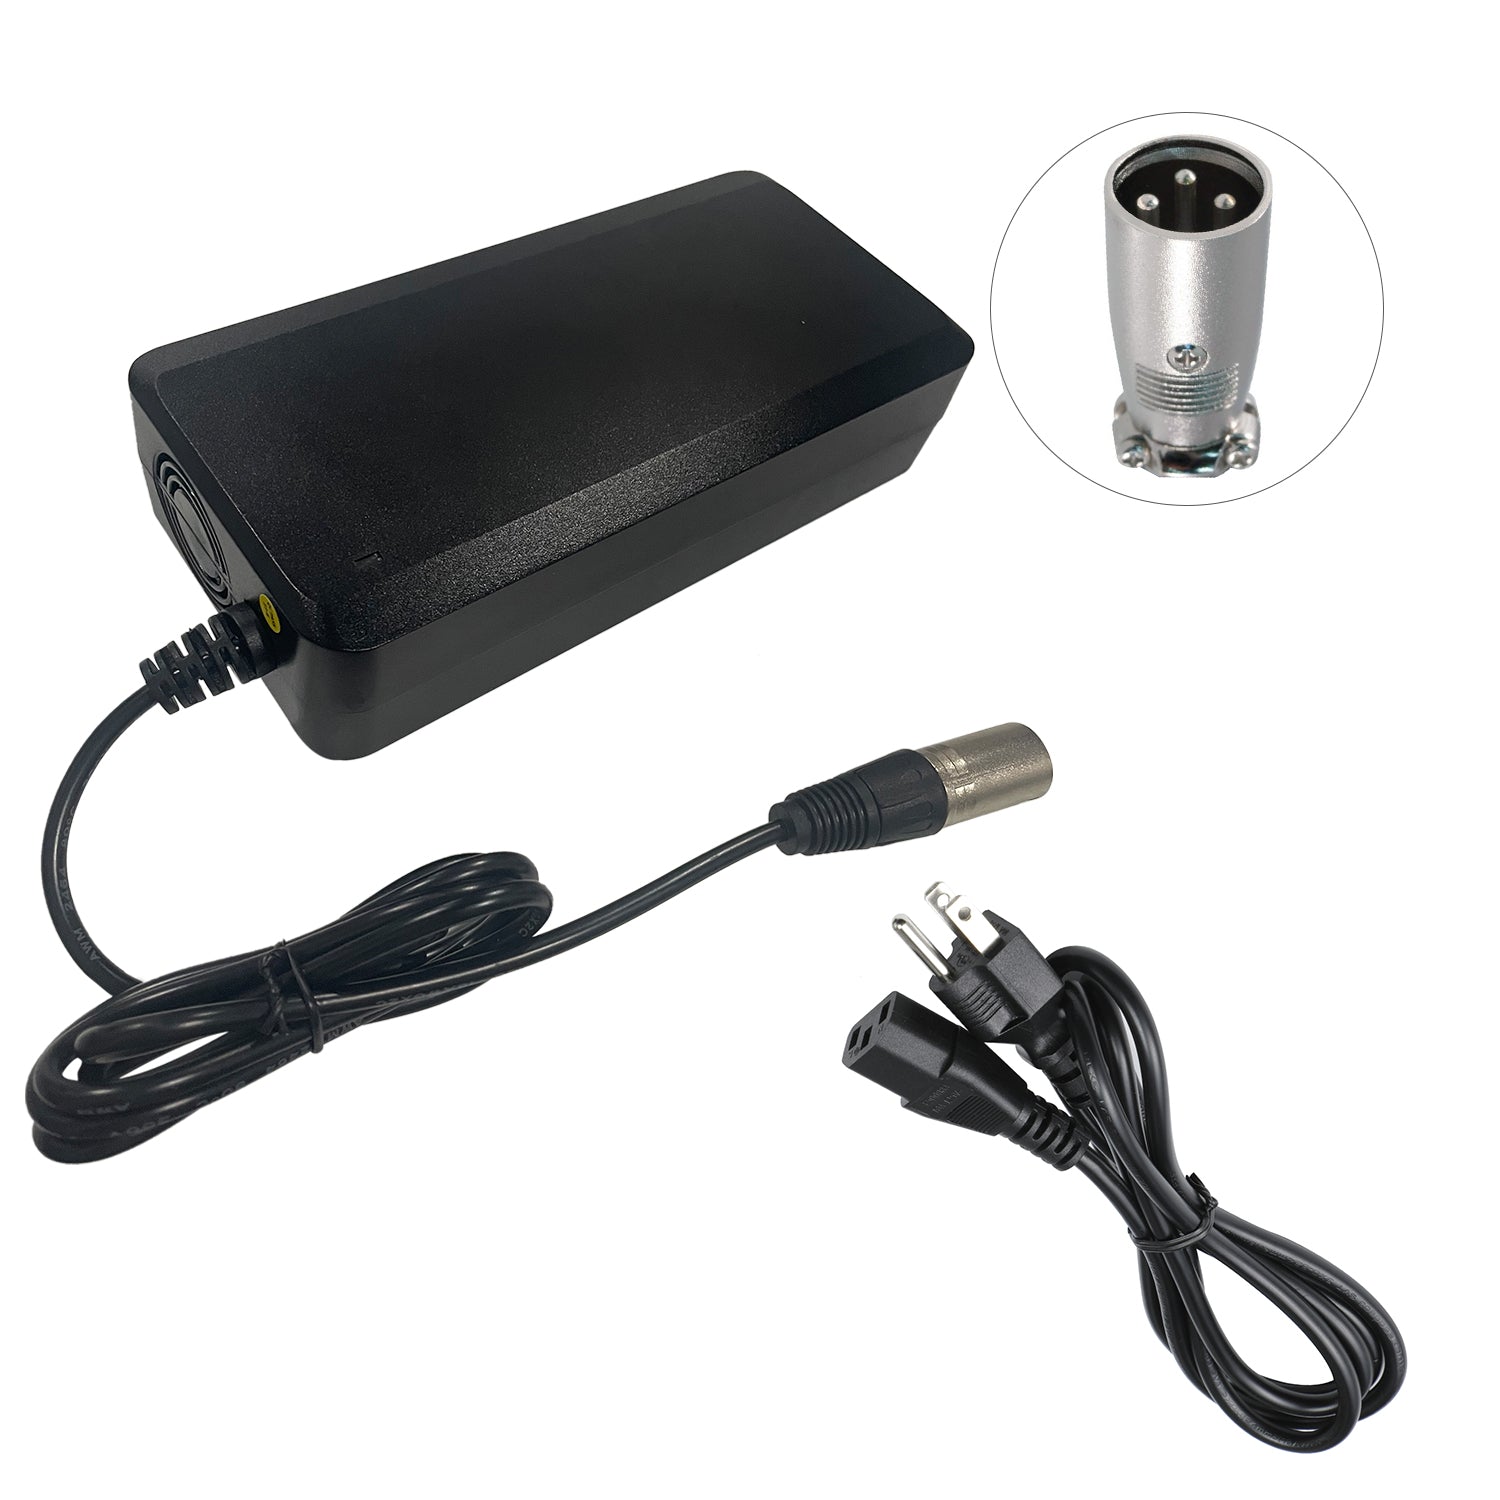 UL Listed 24V 8A Charger for Quickie QM-710 Power Chair